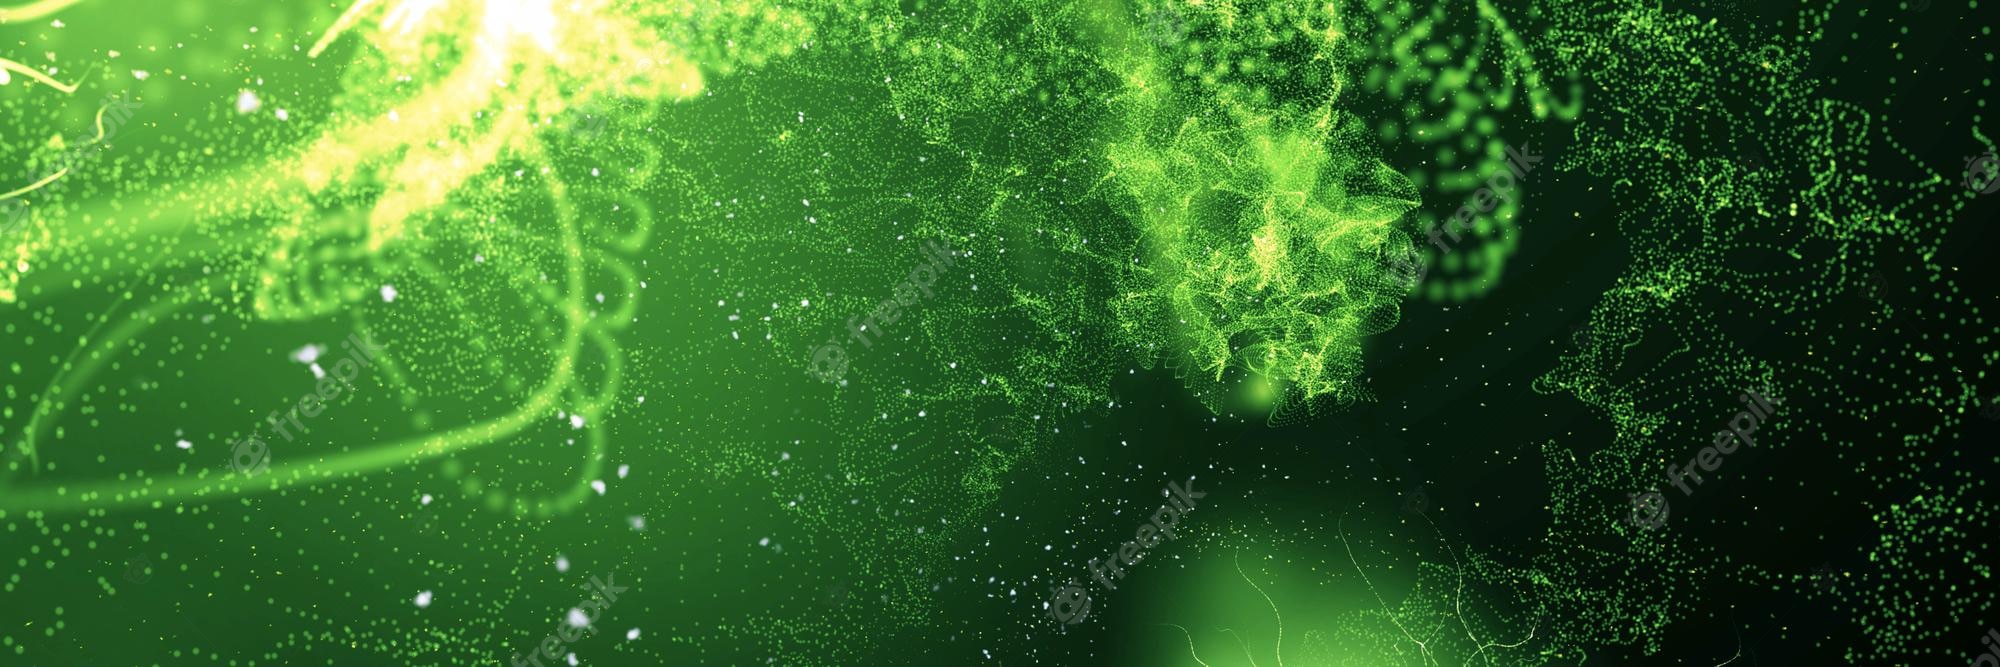 Page green spray paint images free vectors stock photos psd